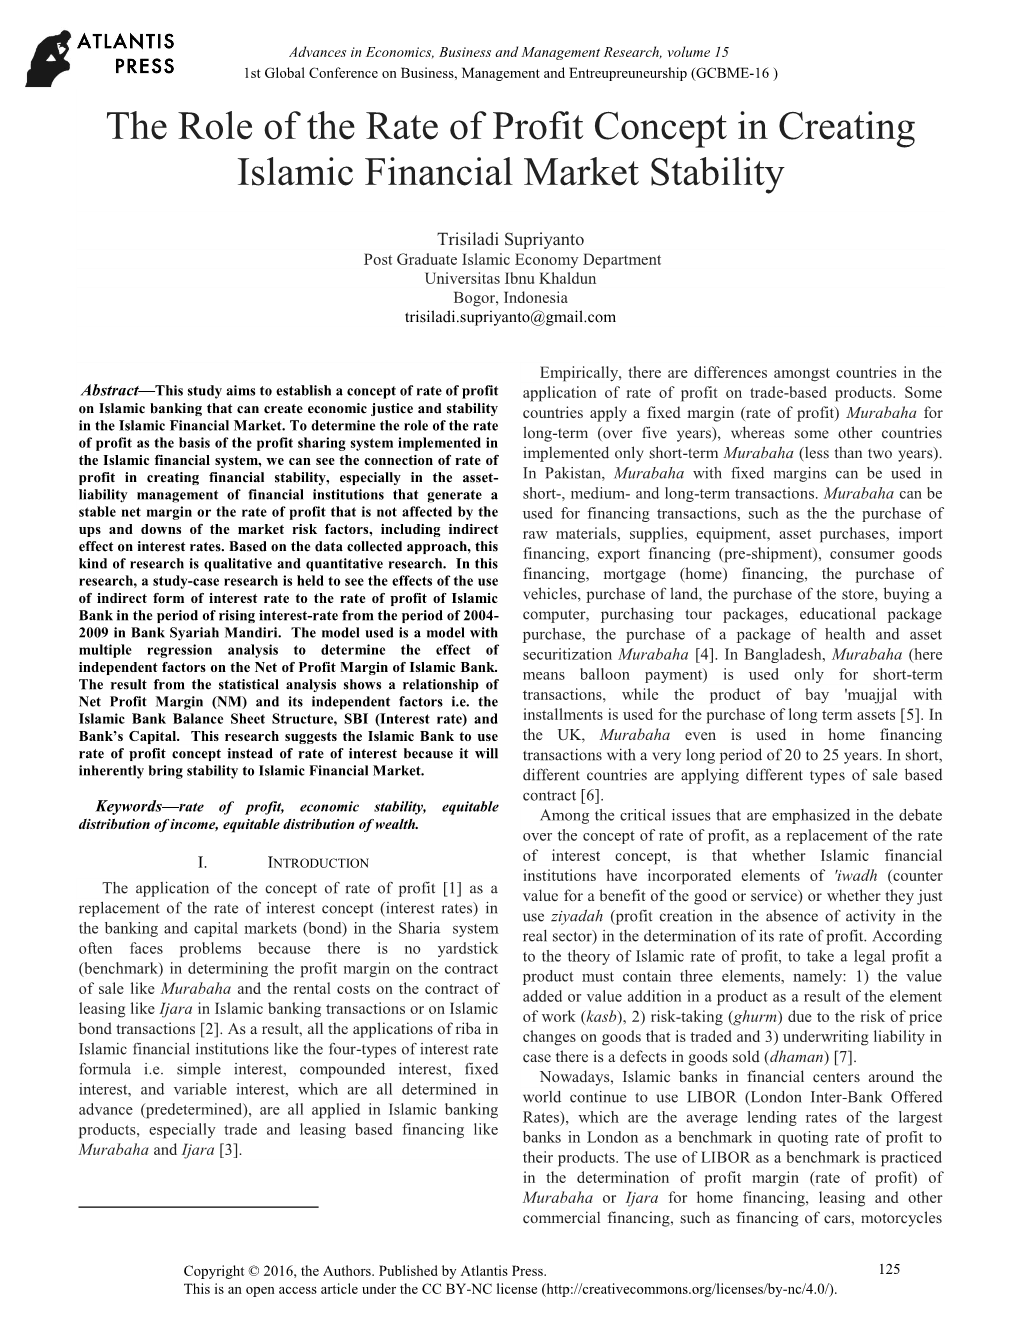 The Role of the Rate of Profit Concept in Creating Islamic Financial Market Stability